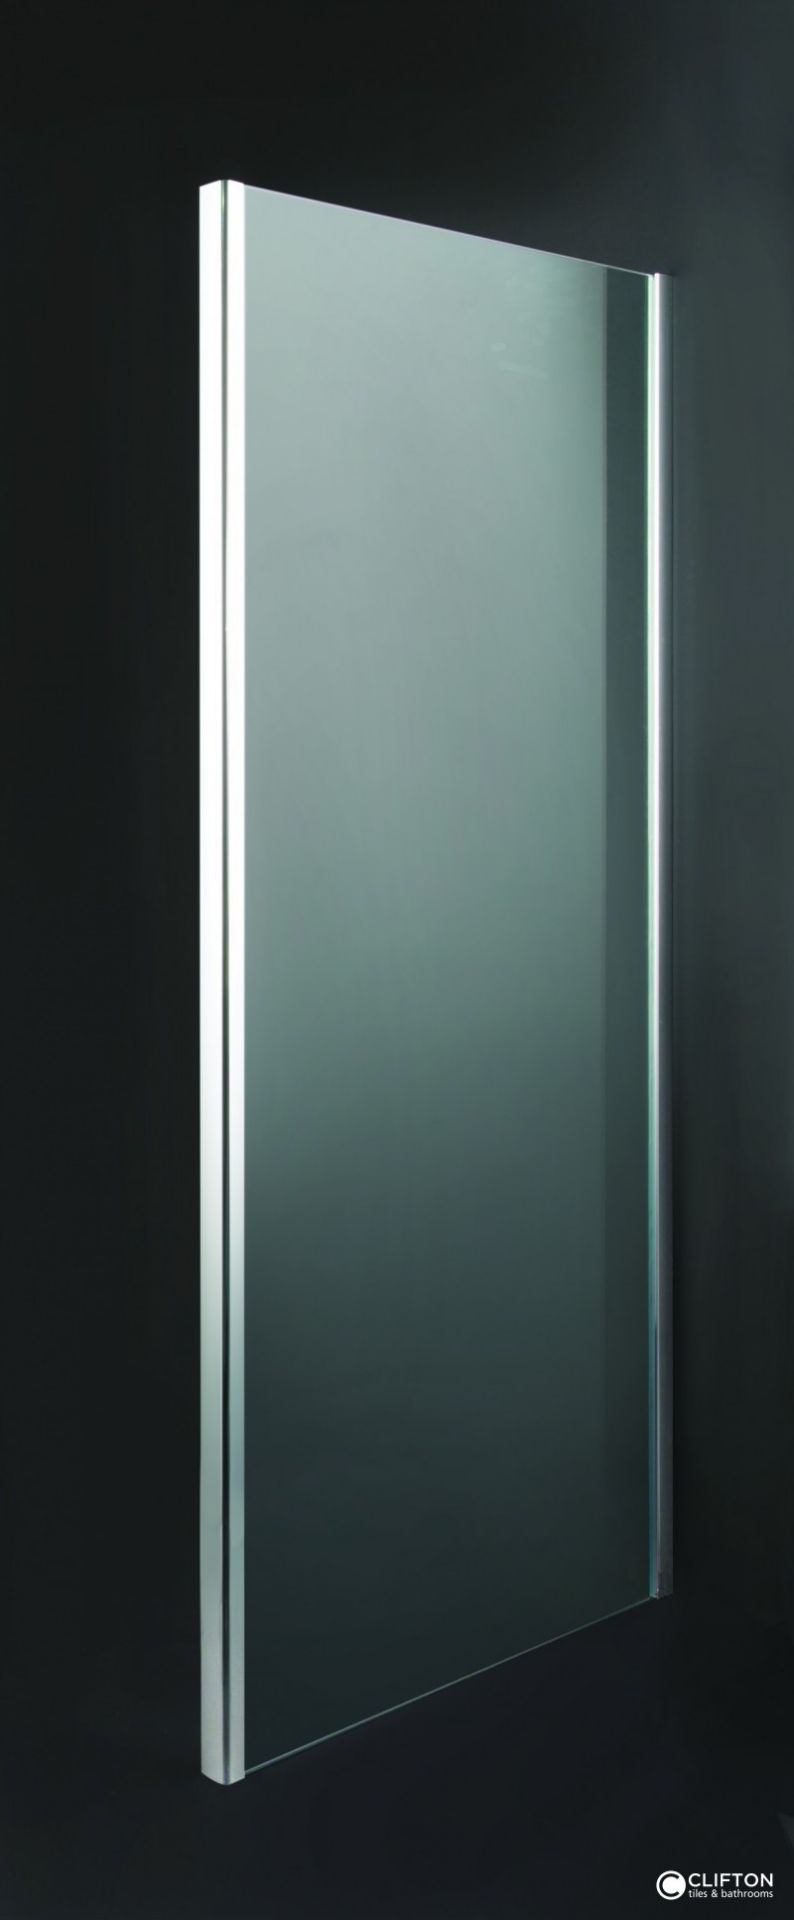 luxury 700mm shower glass side panel for Walk in Showers, new and boxed, RRP £137